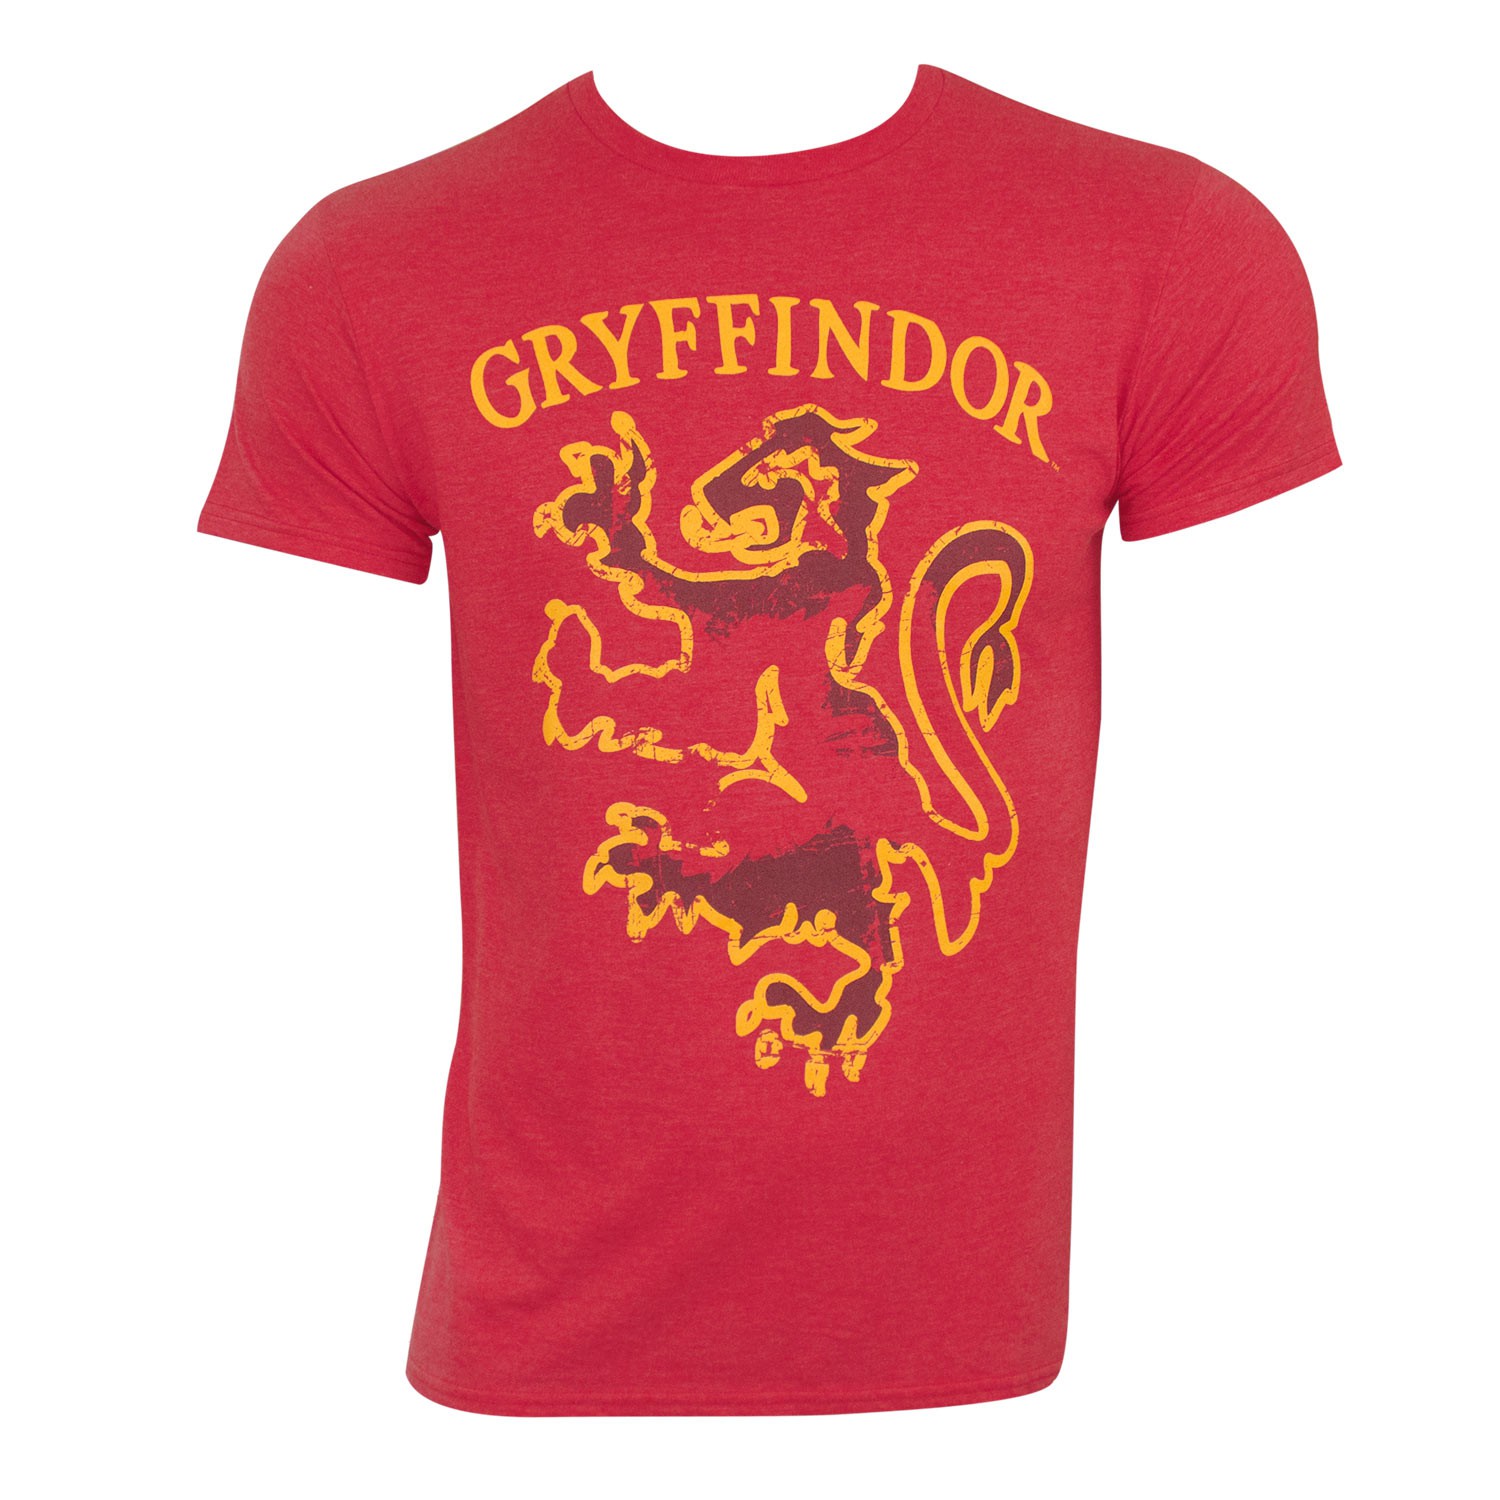 Harry Potter Gryffindor Red Tee Shirt